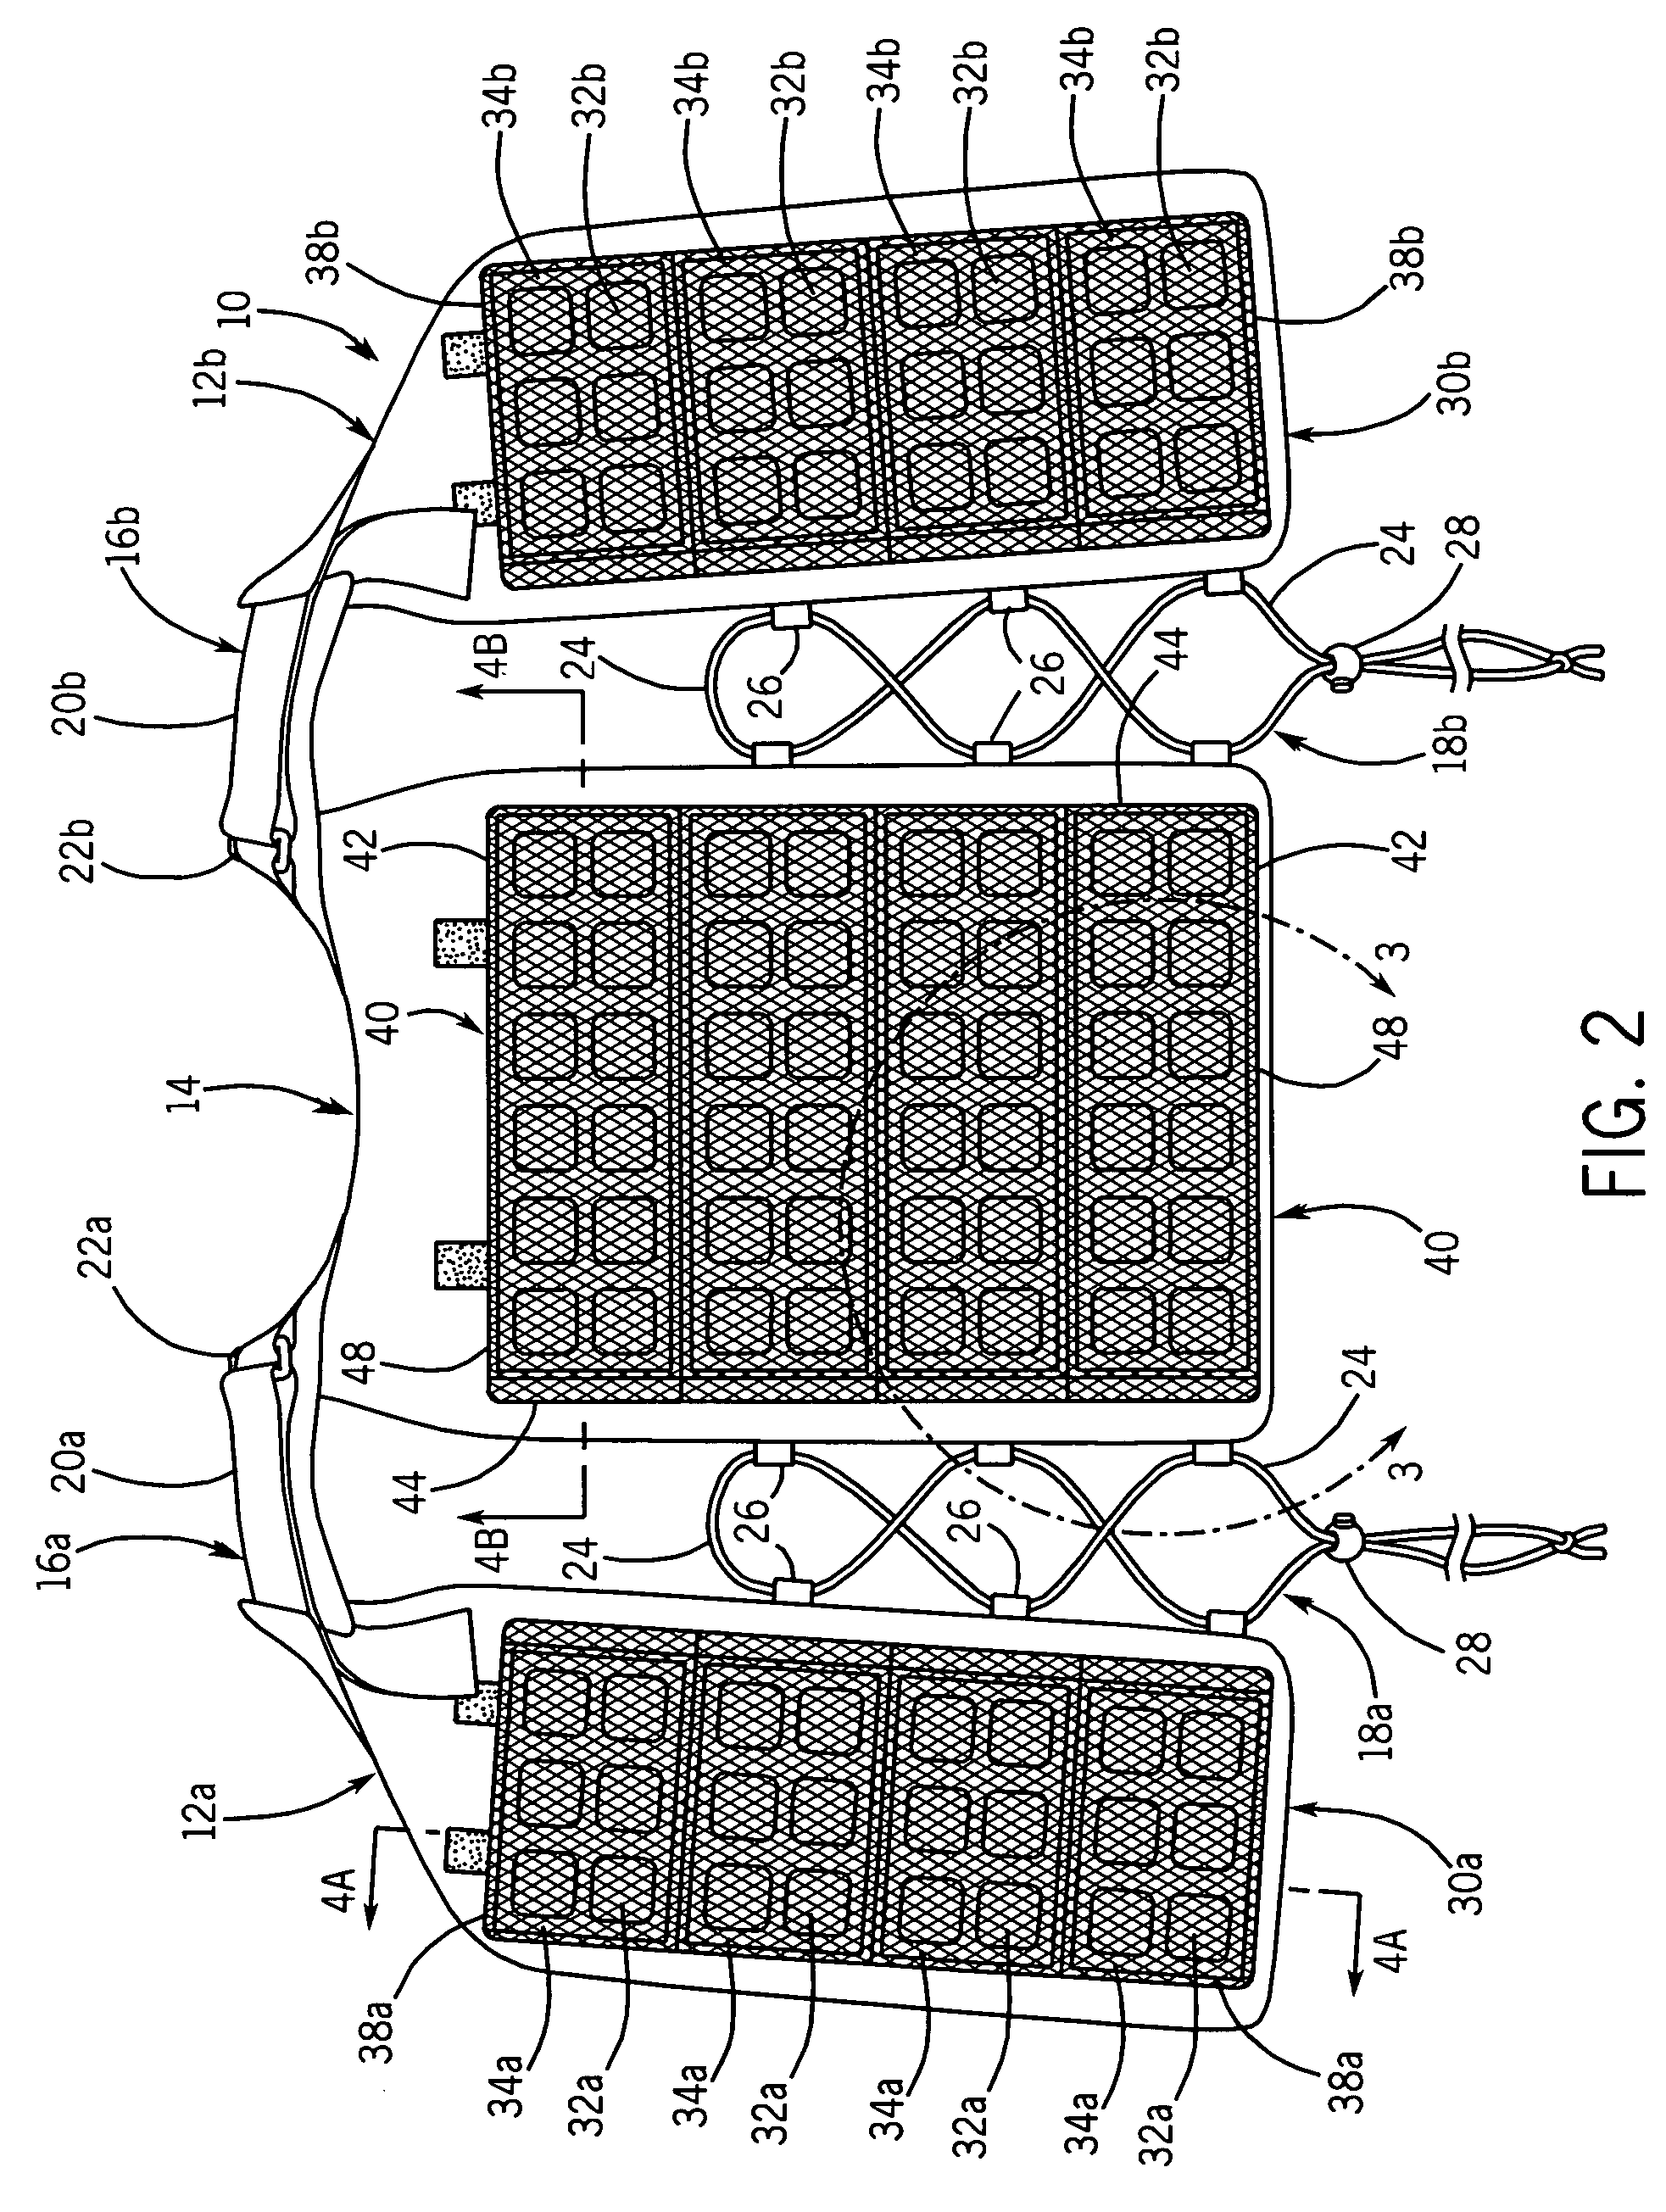 Temperature control vest having visible ice sheets composed of refrigerant cubes